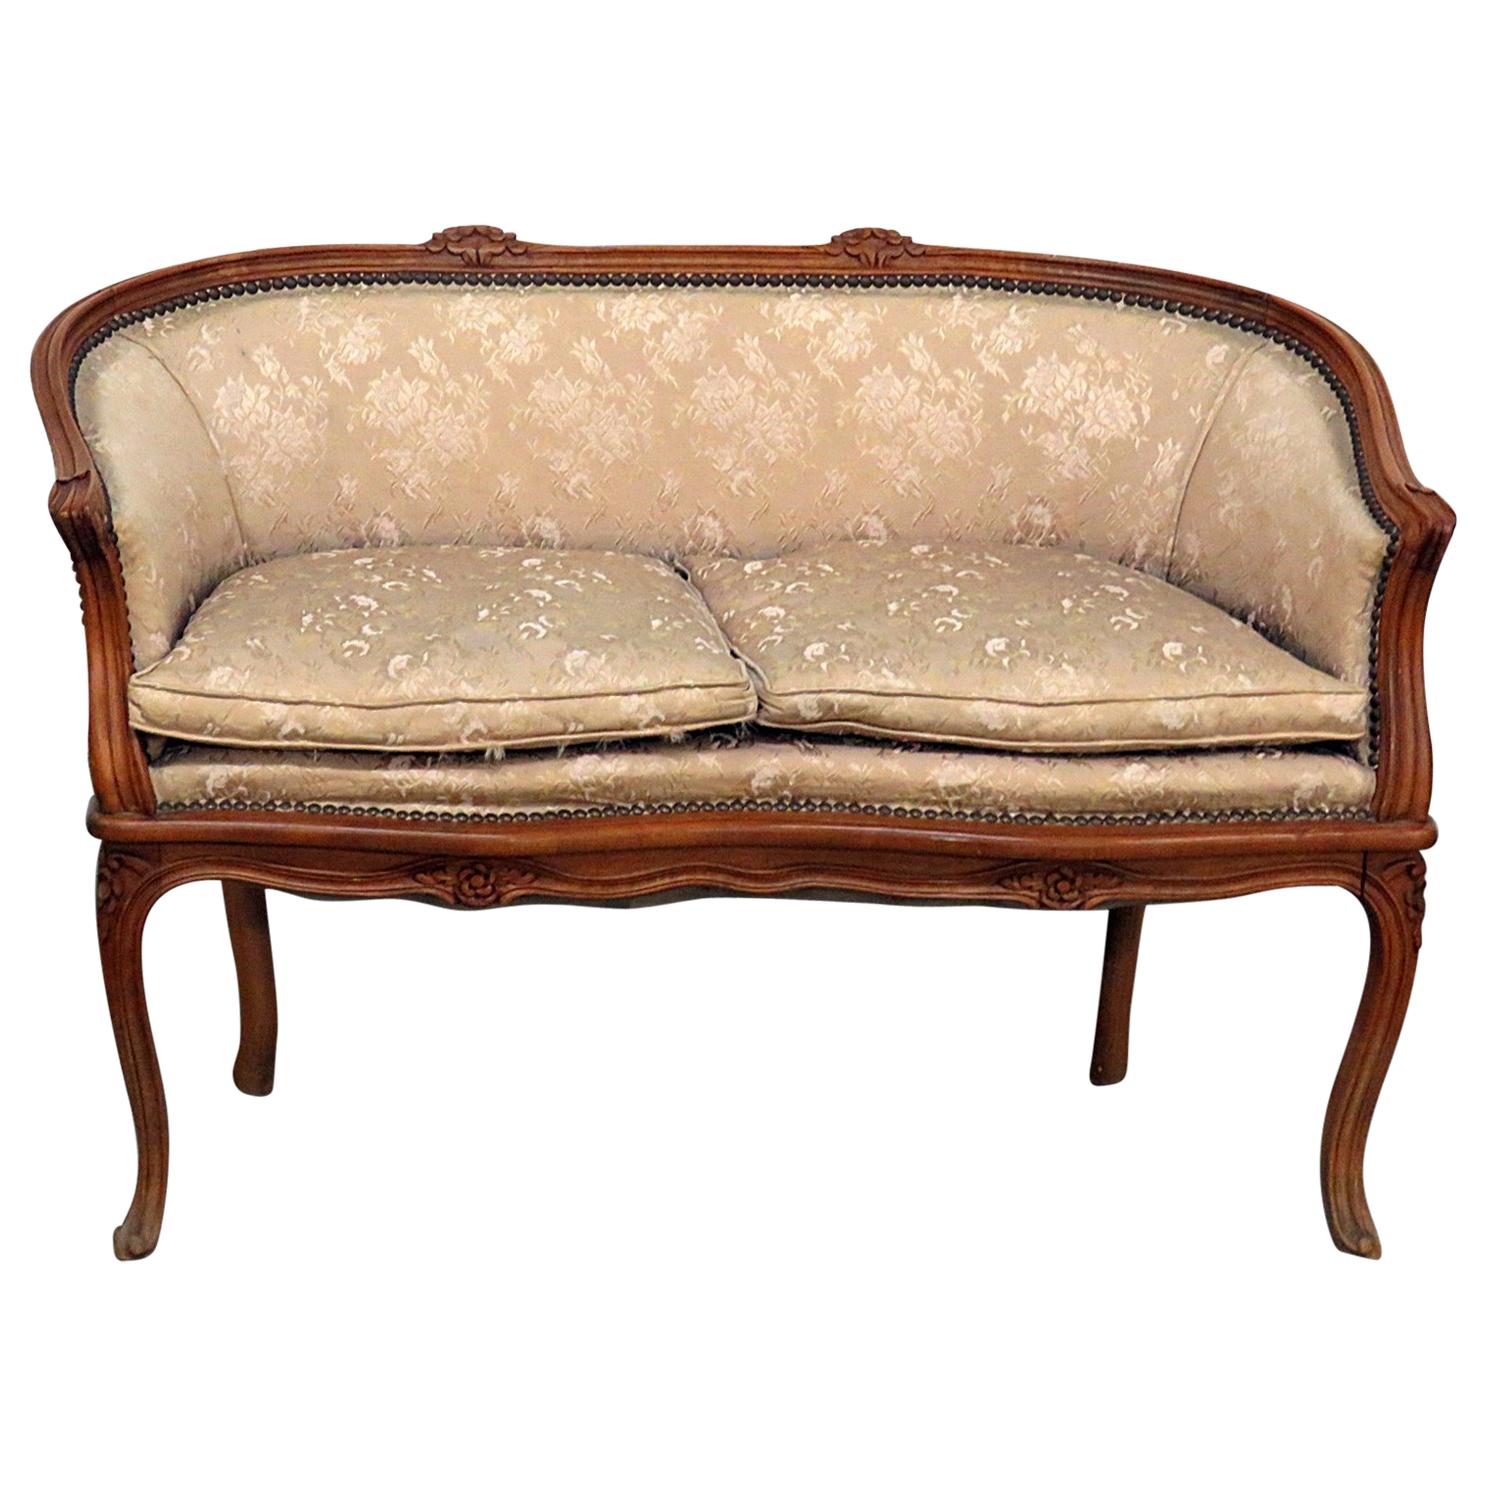 Antique Carved Walnut Louis XV Style Settee Sofa Canape